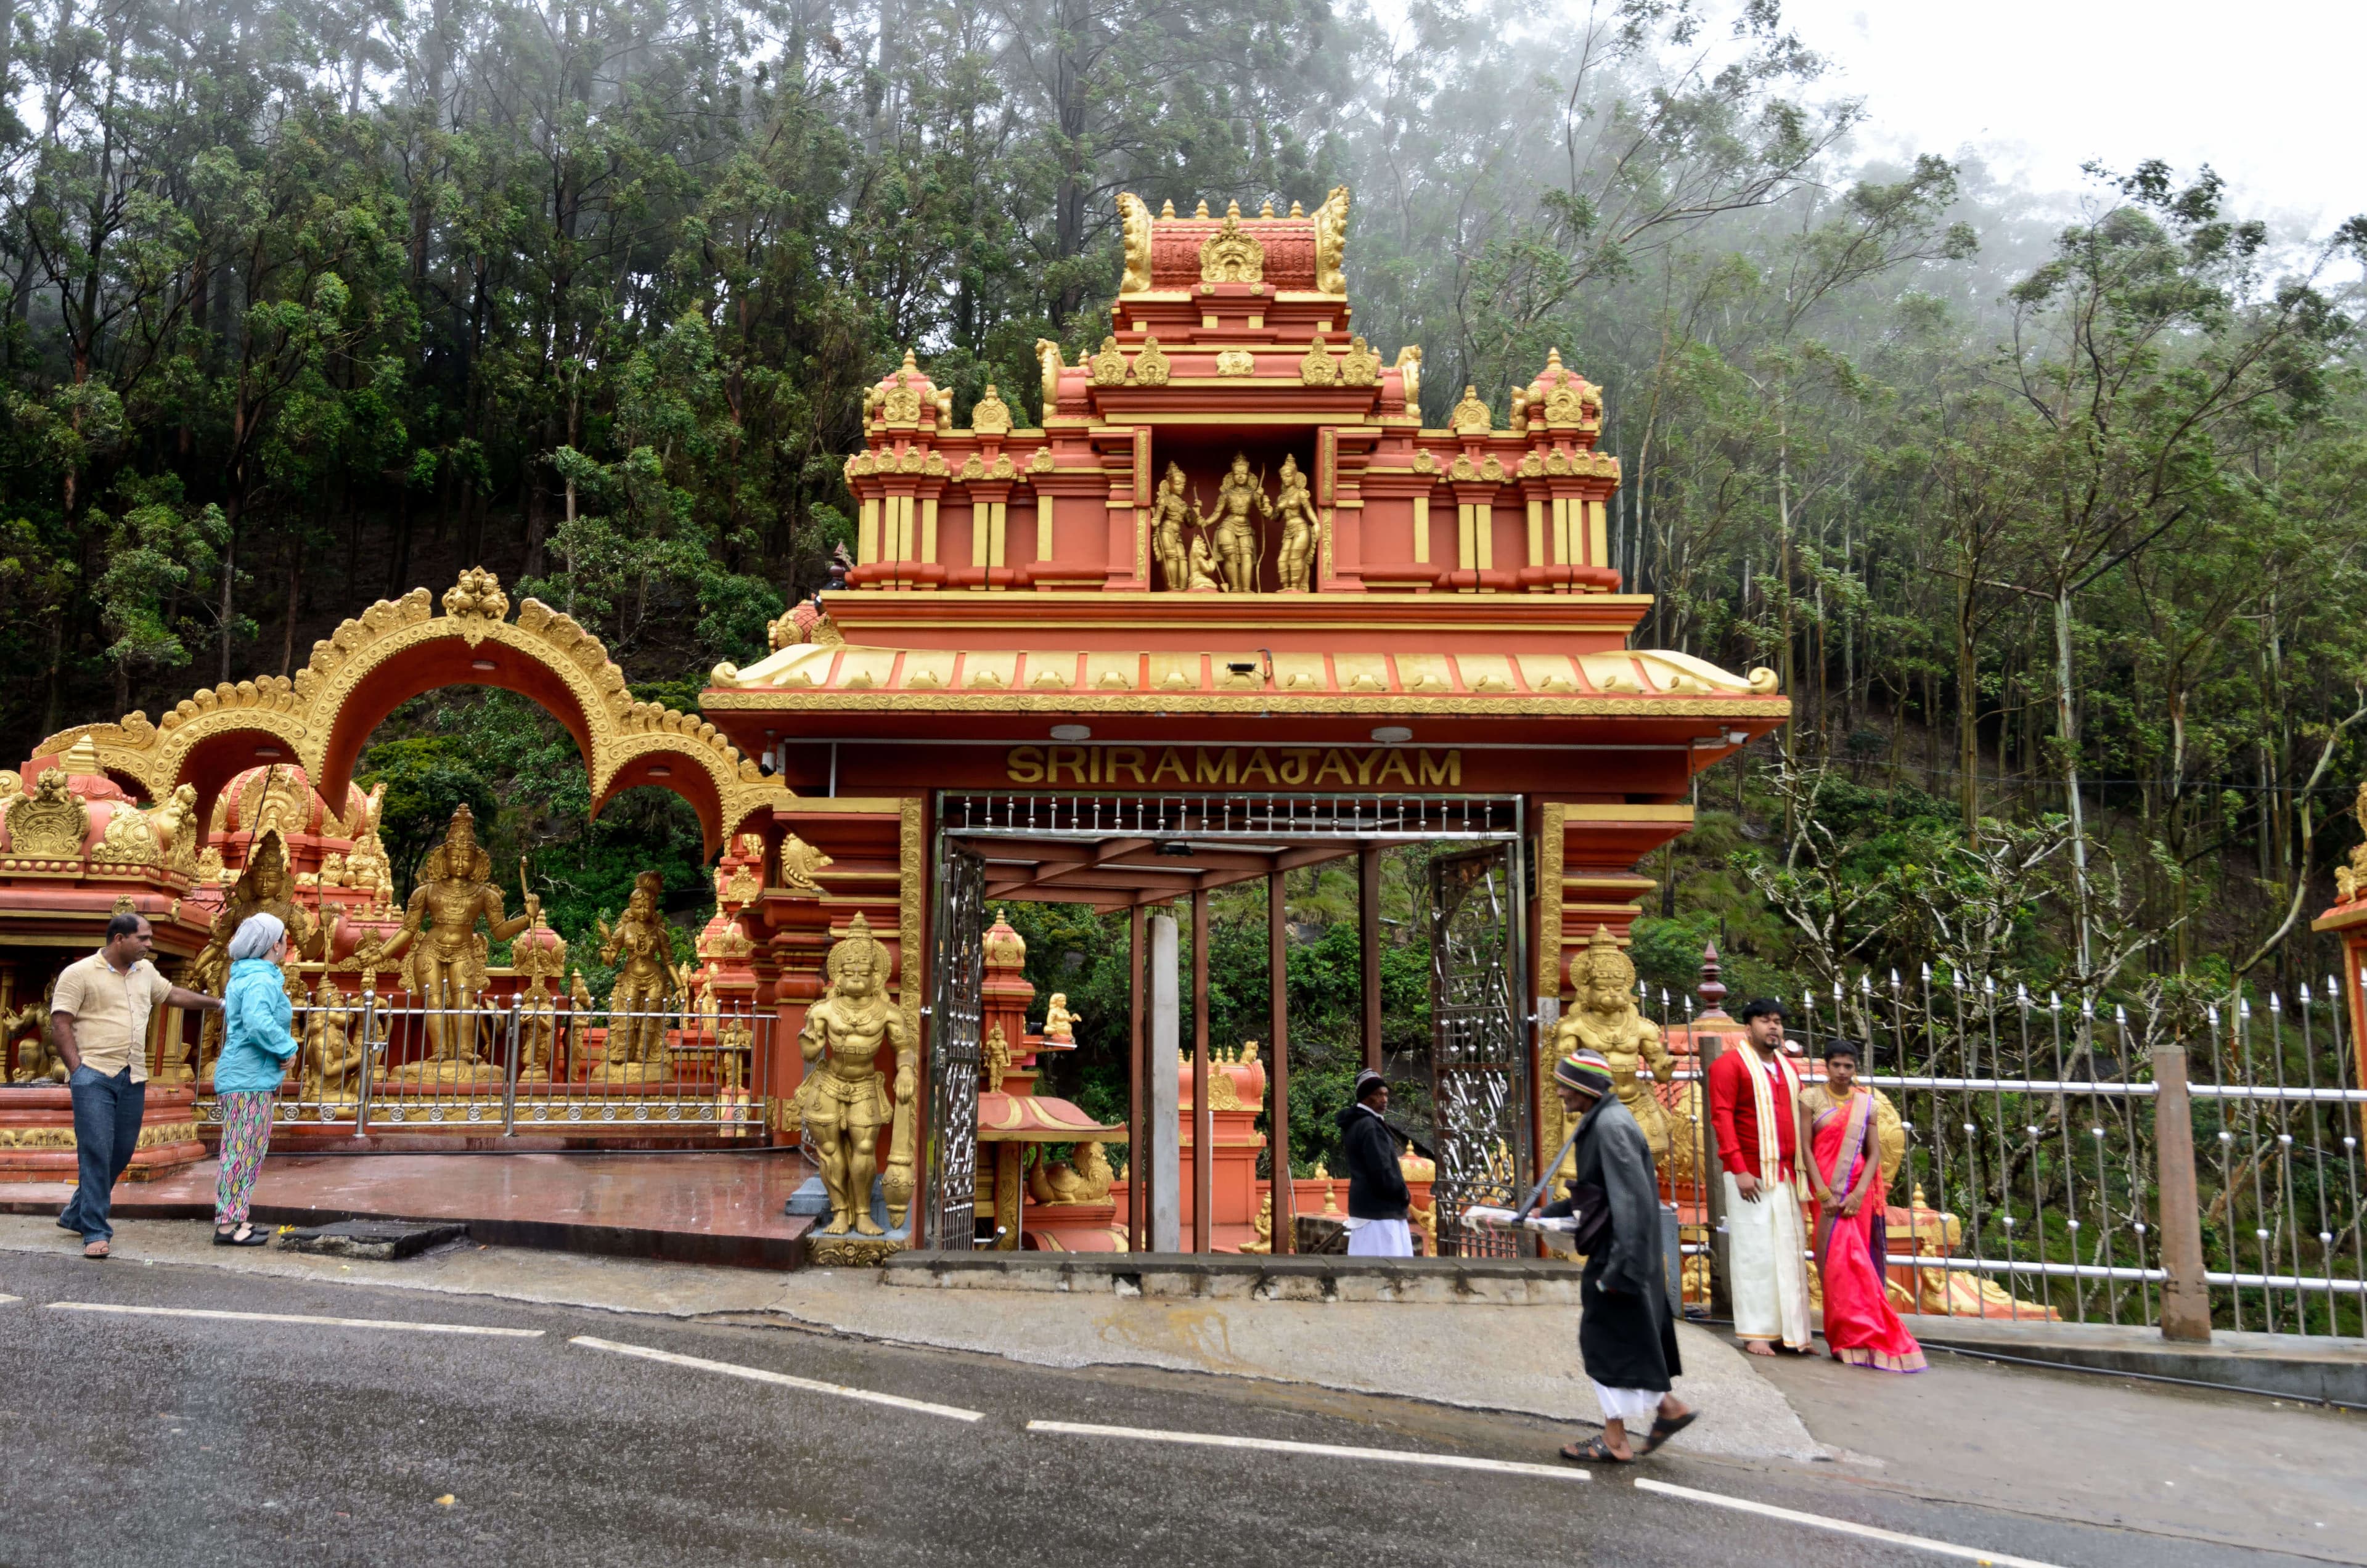 A woman visit to the Hindu Temple with her guide in Nuwara Eliya Sri Lanka